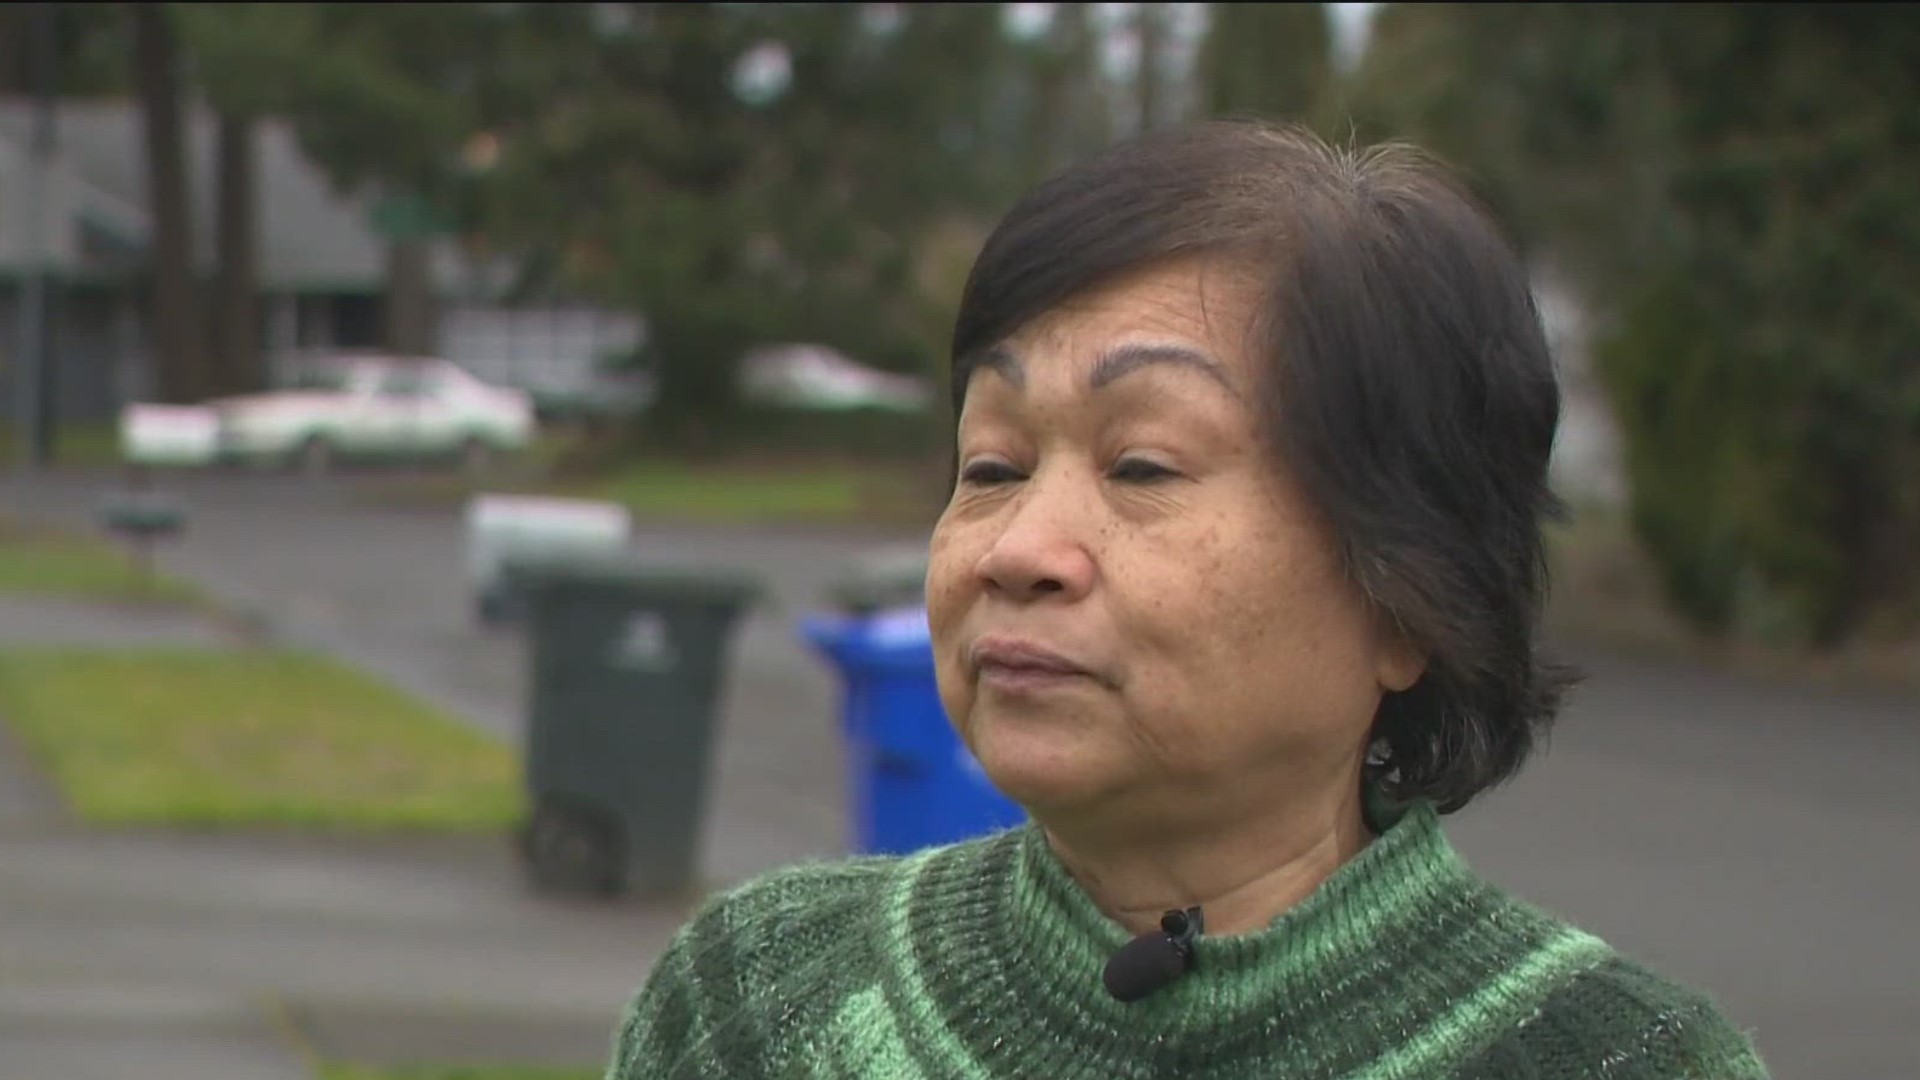 A grandmother in Gresham was followed home after withdrawing $500 from an ATM and robbed in her driveway.